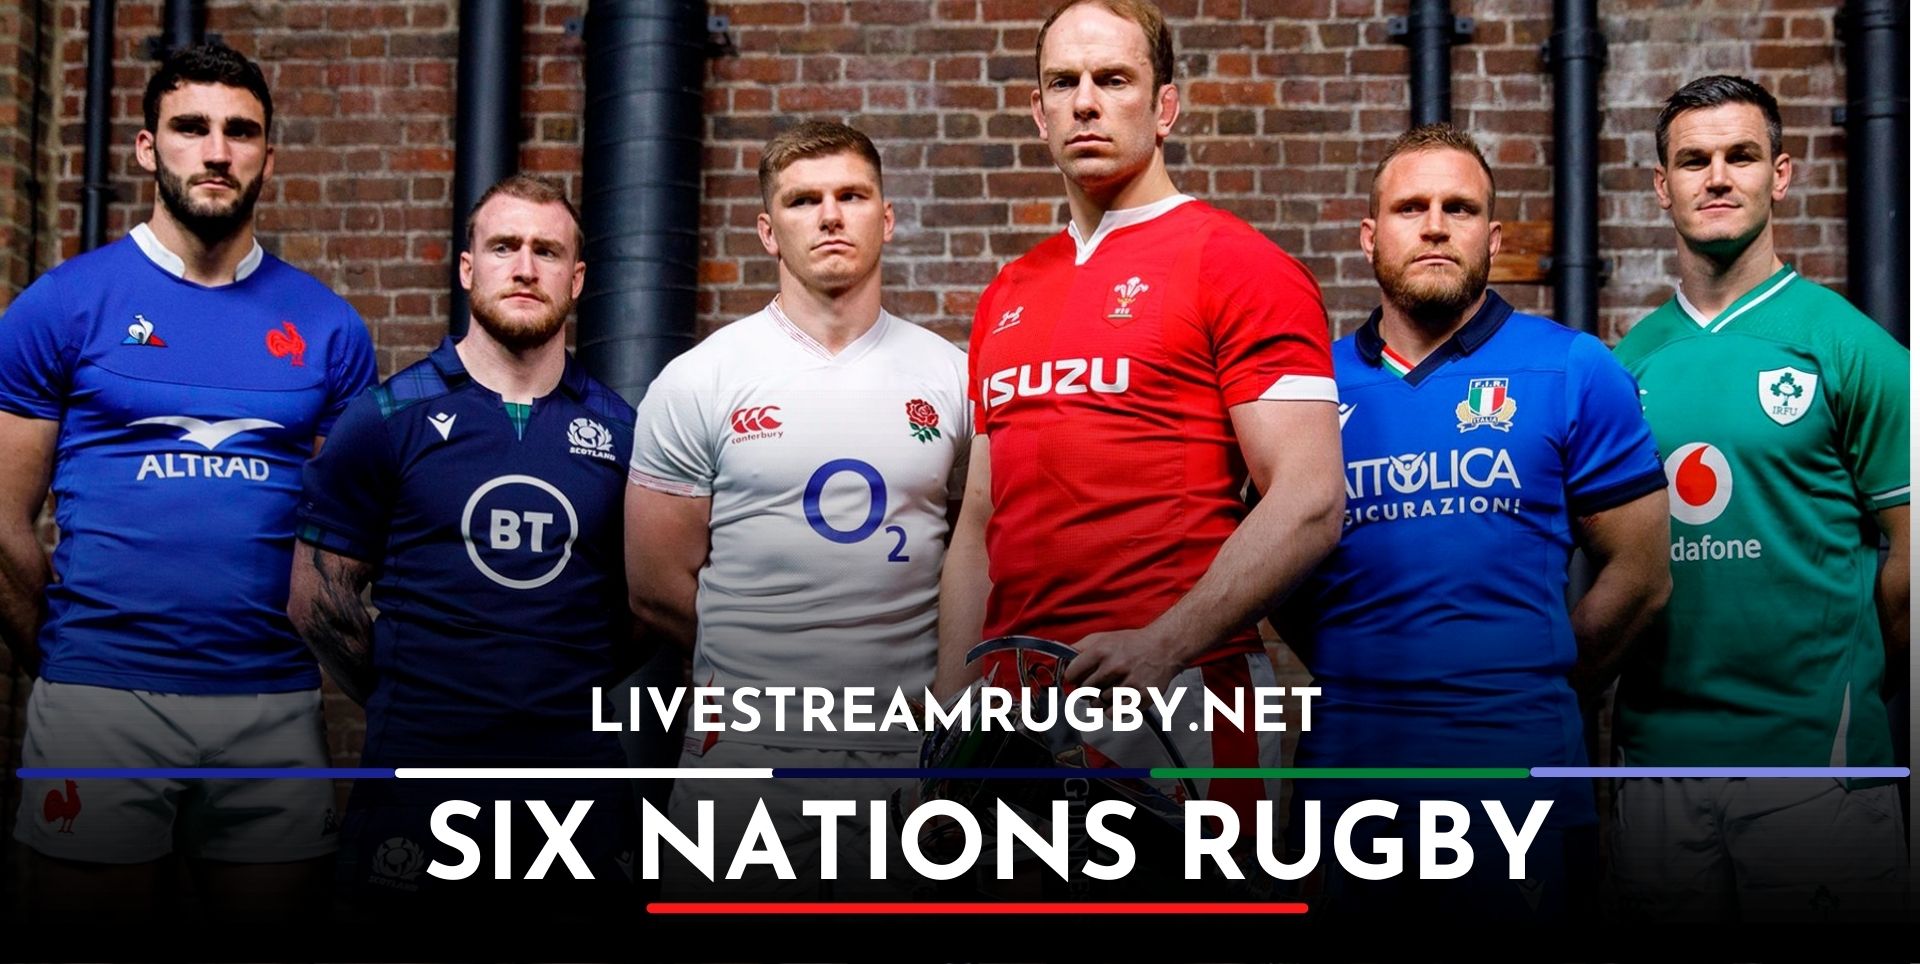 guinness-six-nations-fixtures-announced